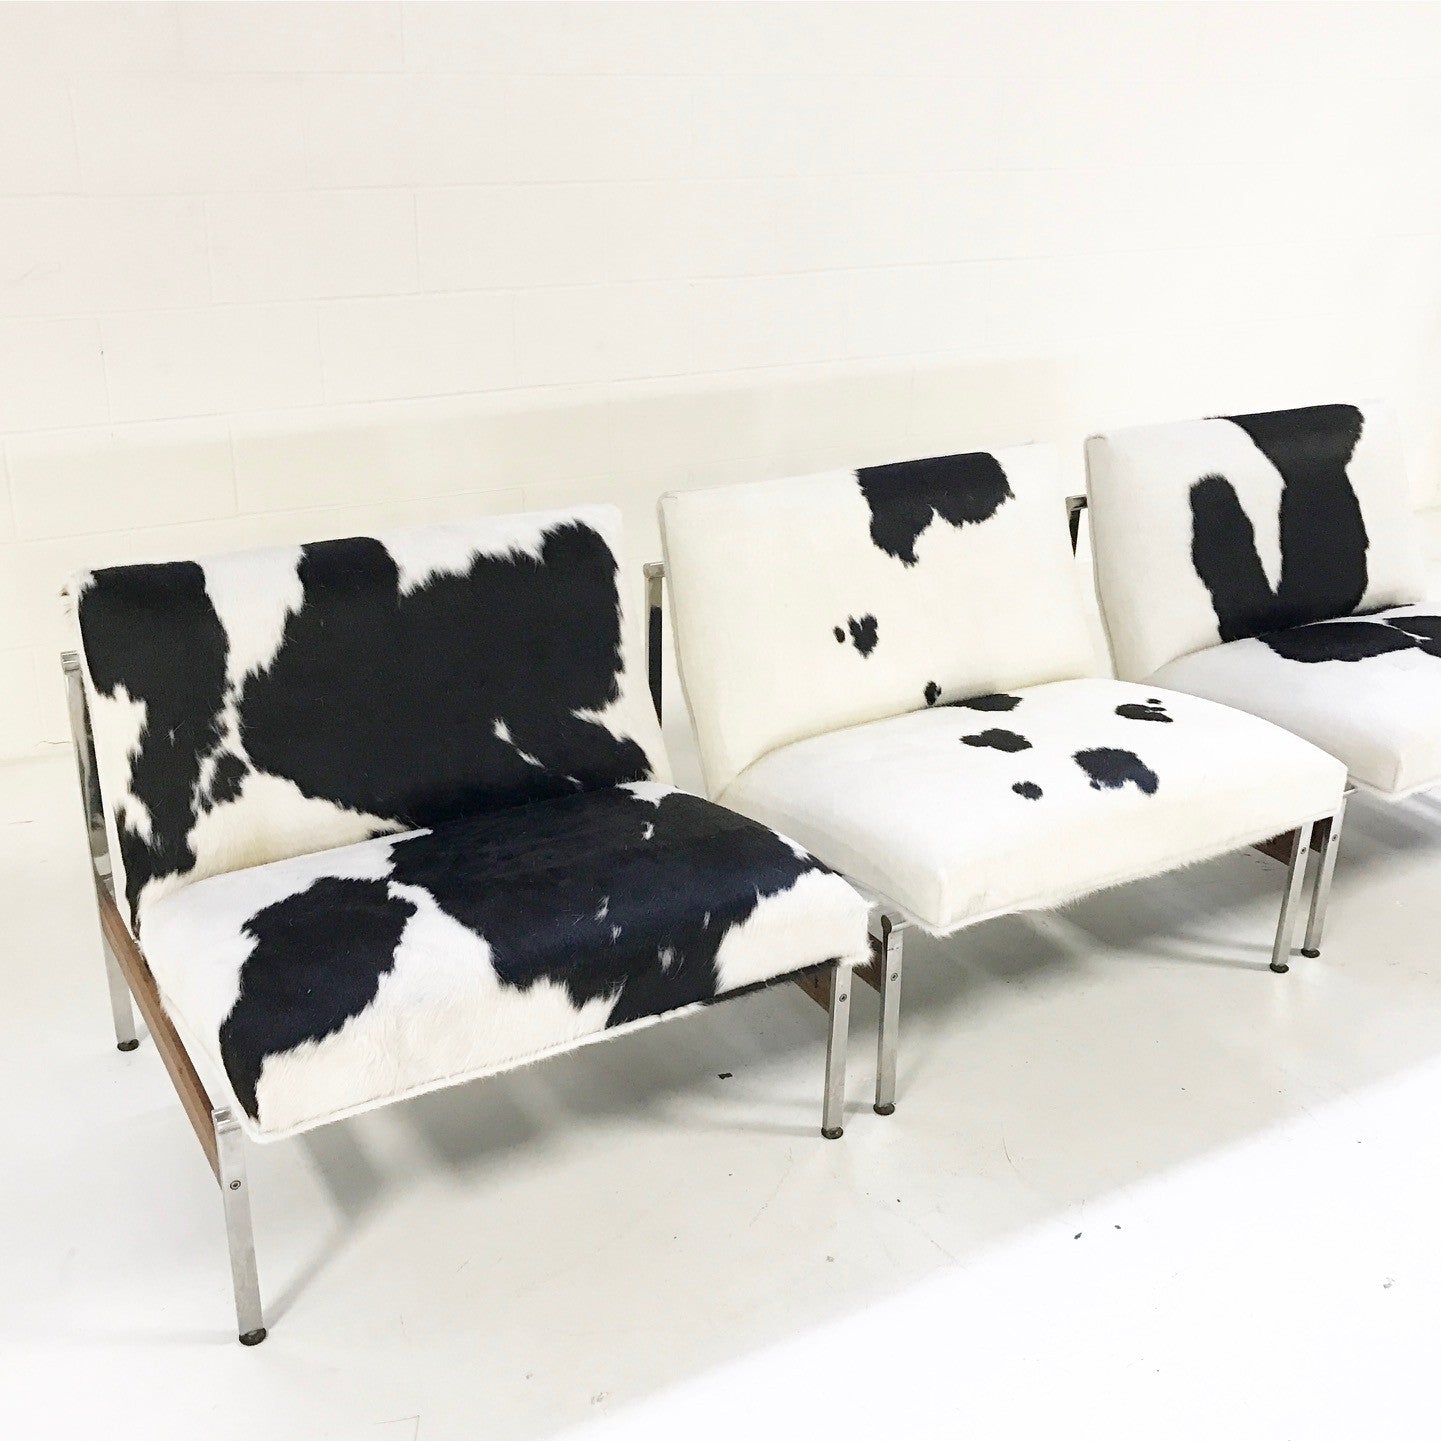 Lounge Chairs in Brazilian Cowhide, set of 3 - FORSYTH